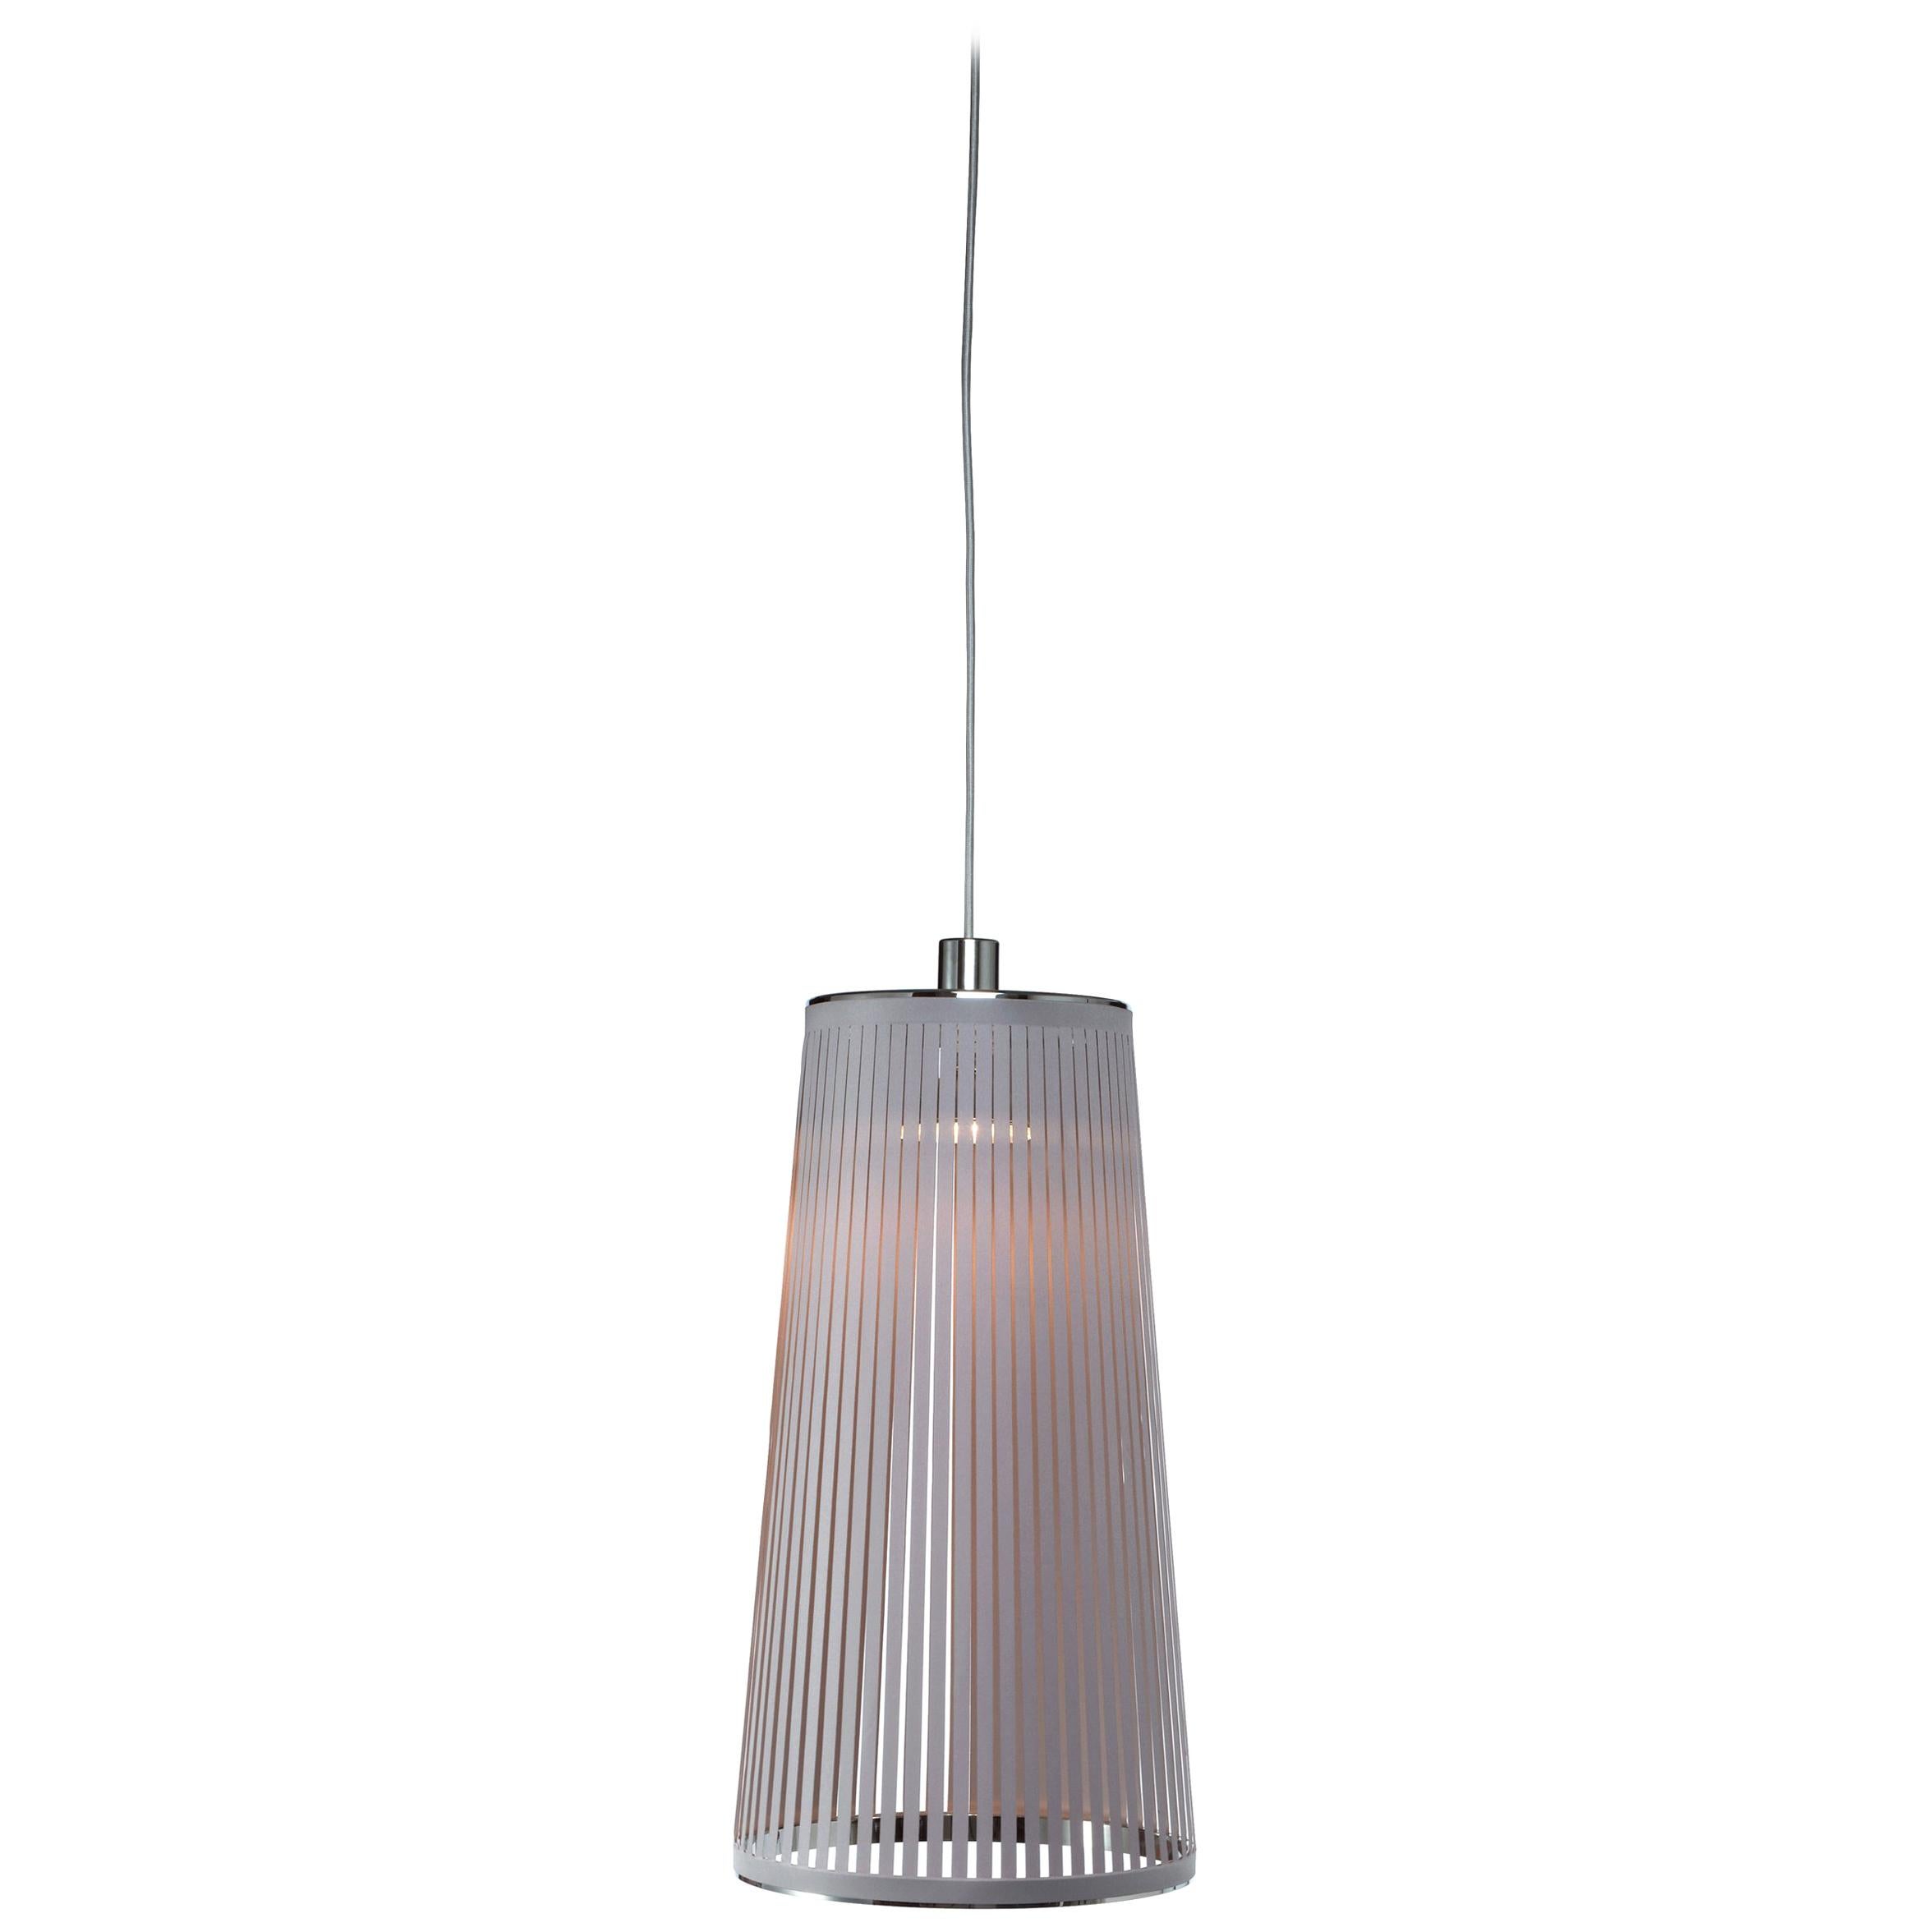 Solis 24 Pendant Light in Silver by Pablo Designs